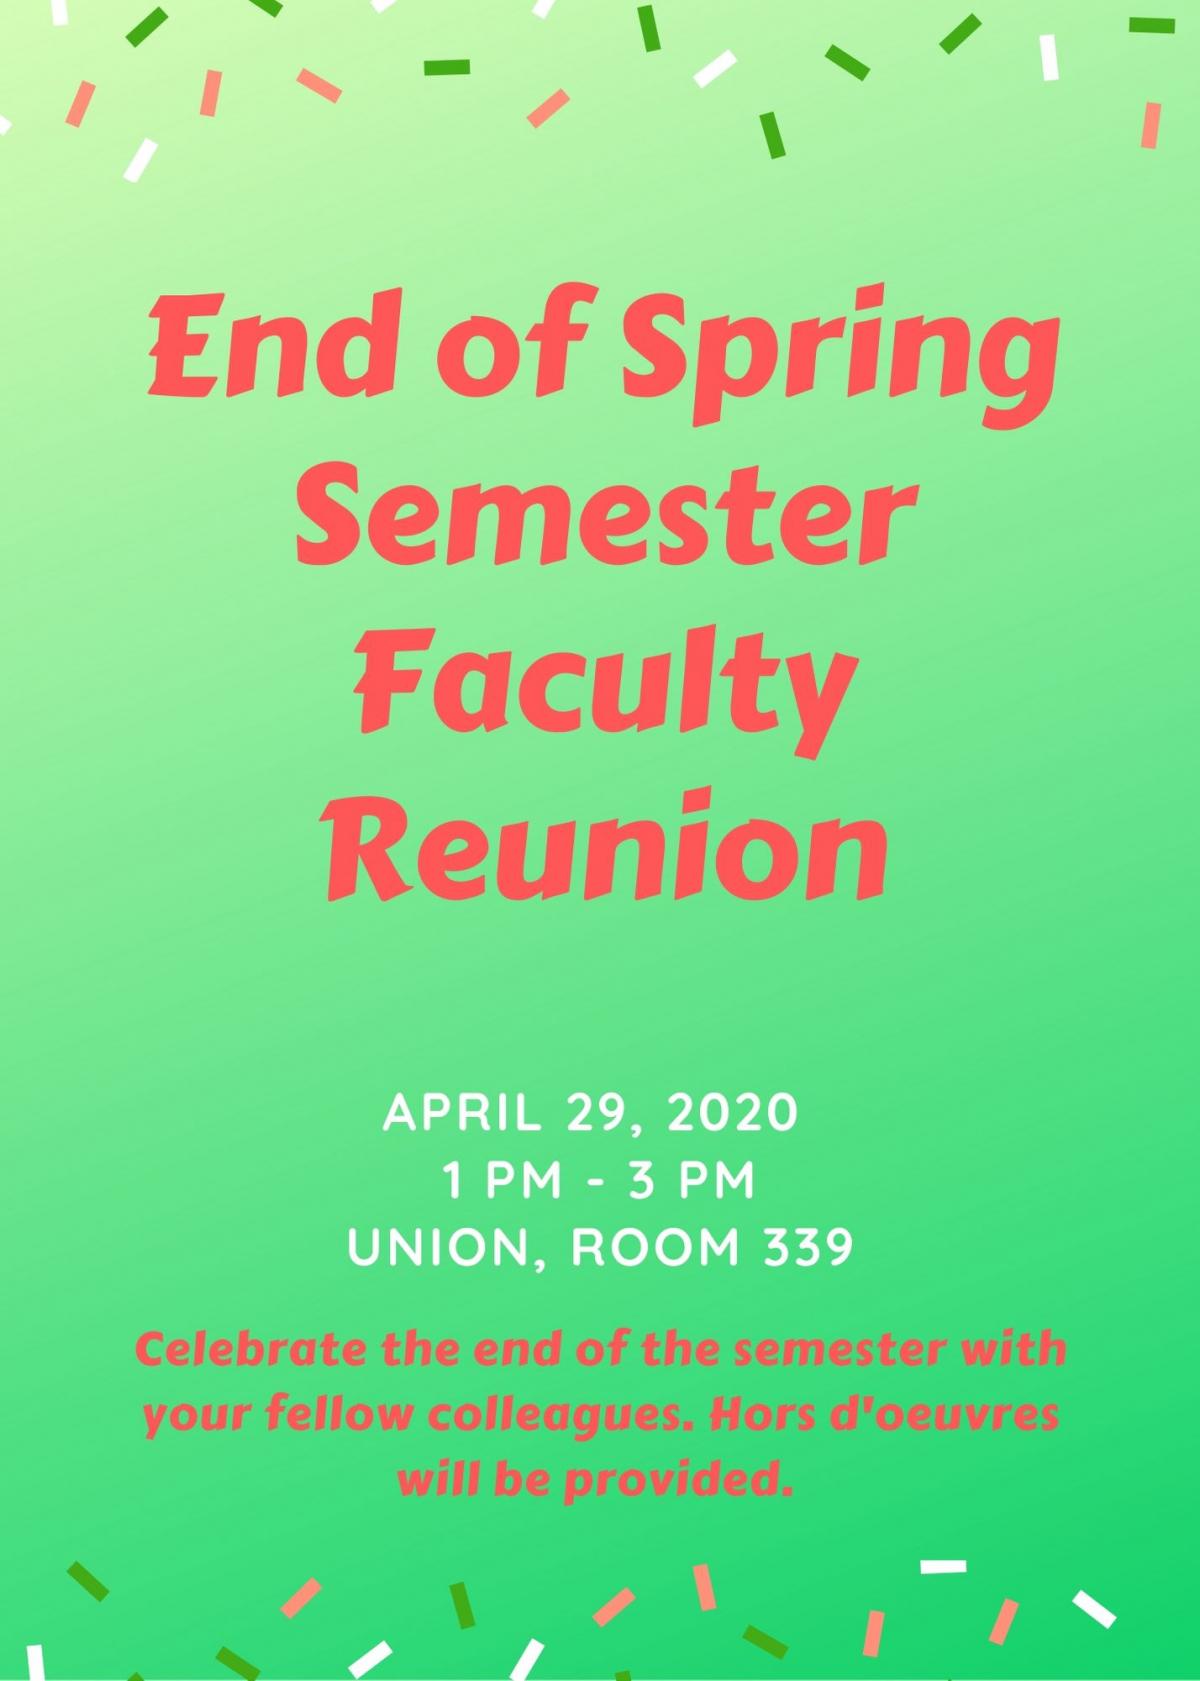 End of Spring Semester Faculty Reunion; April 29, 2020 from 1PM-3PM in Union, Room 339; Celebrate the end of the semester with your fellow colleagues. Hors d'oeuvres will be provided. 